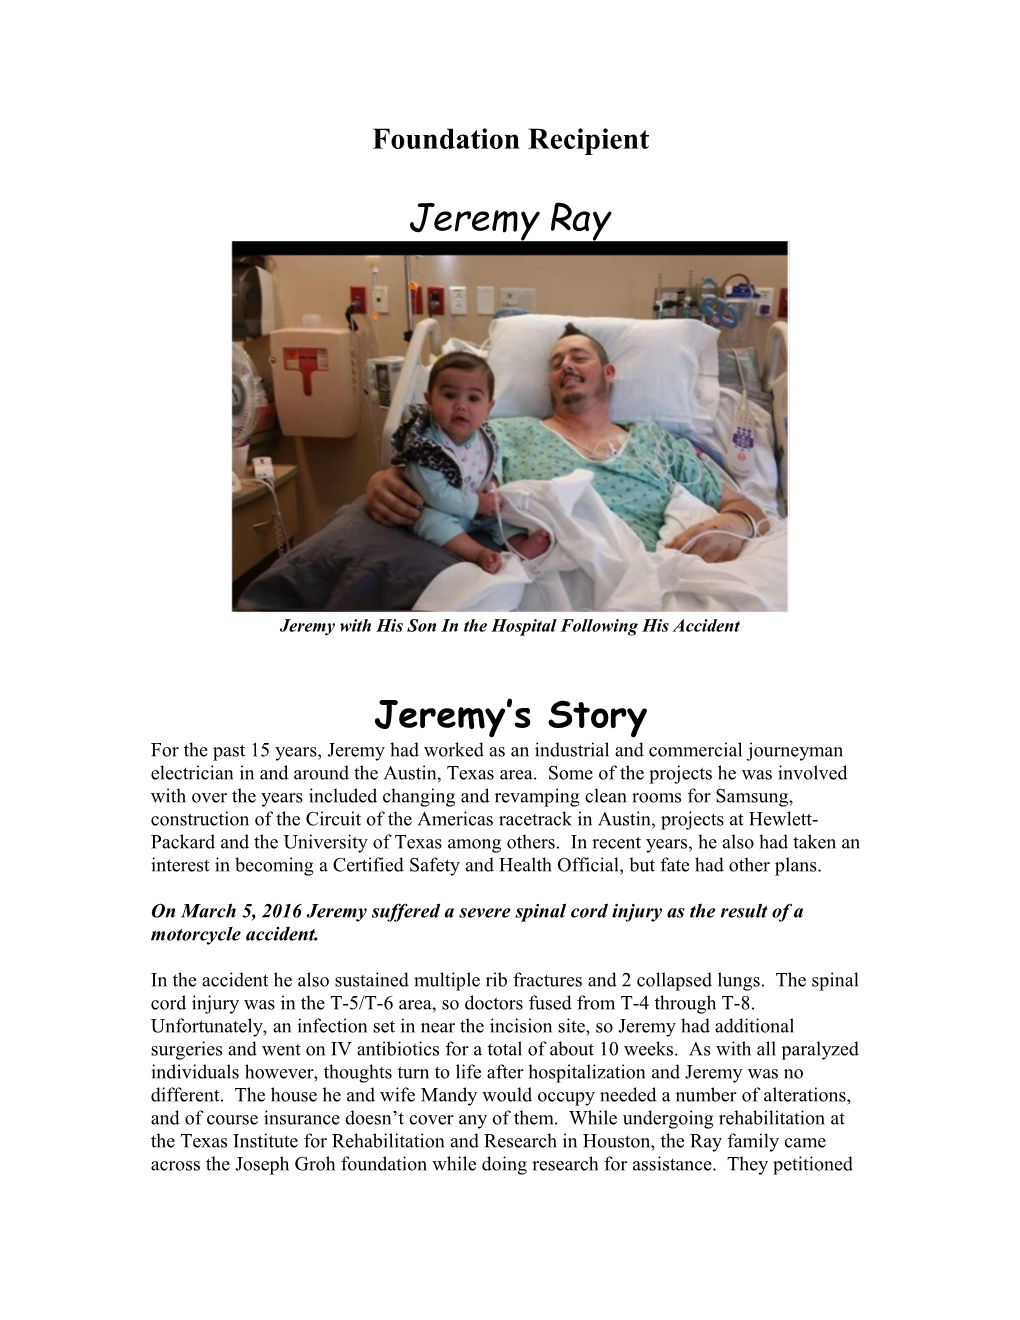 Jeremy with His Son in the Hospital Following His Accident